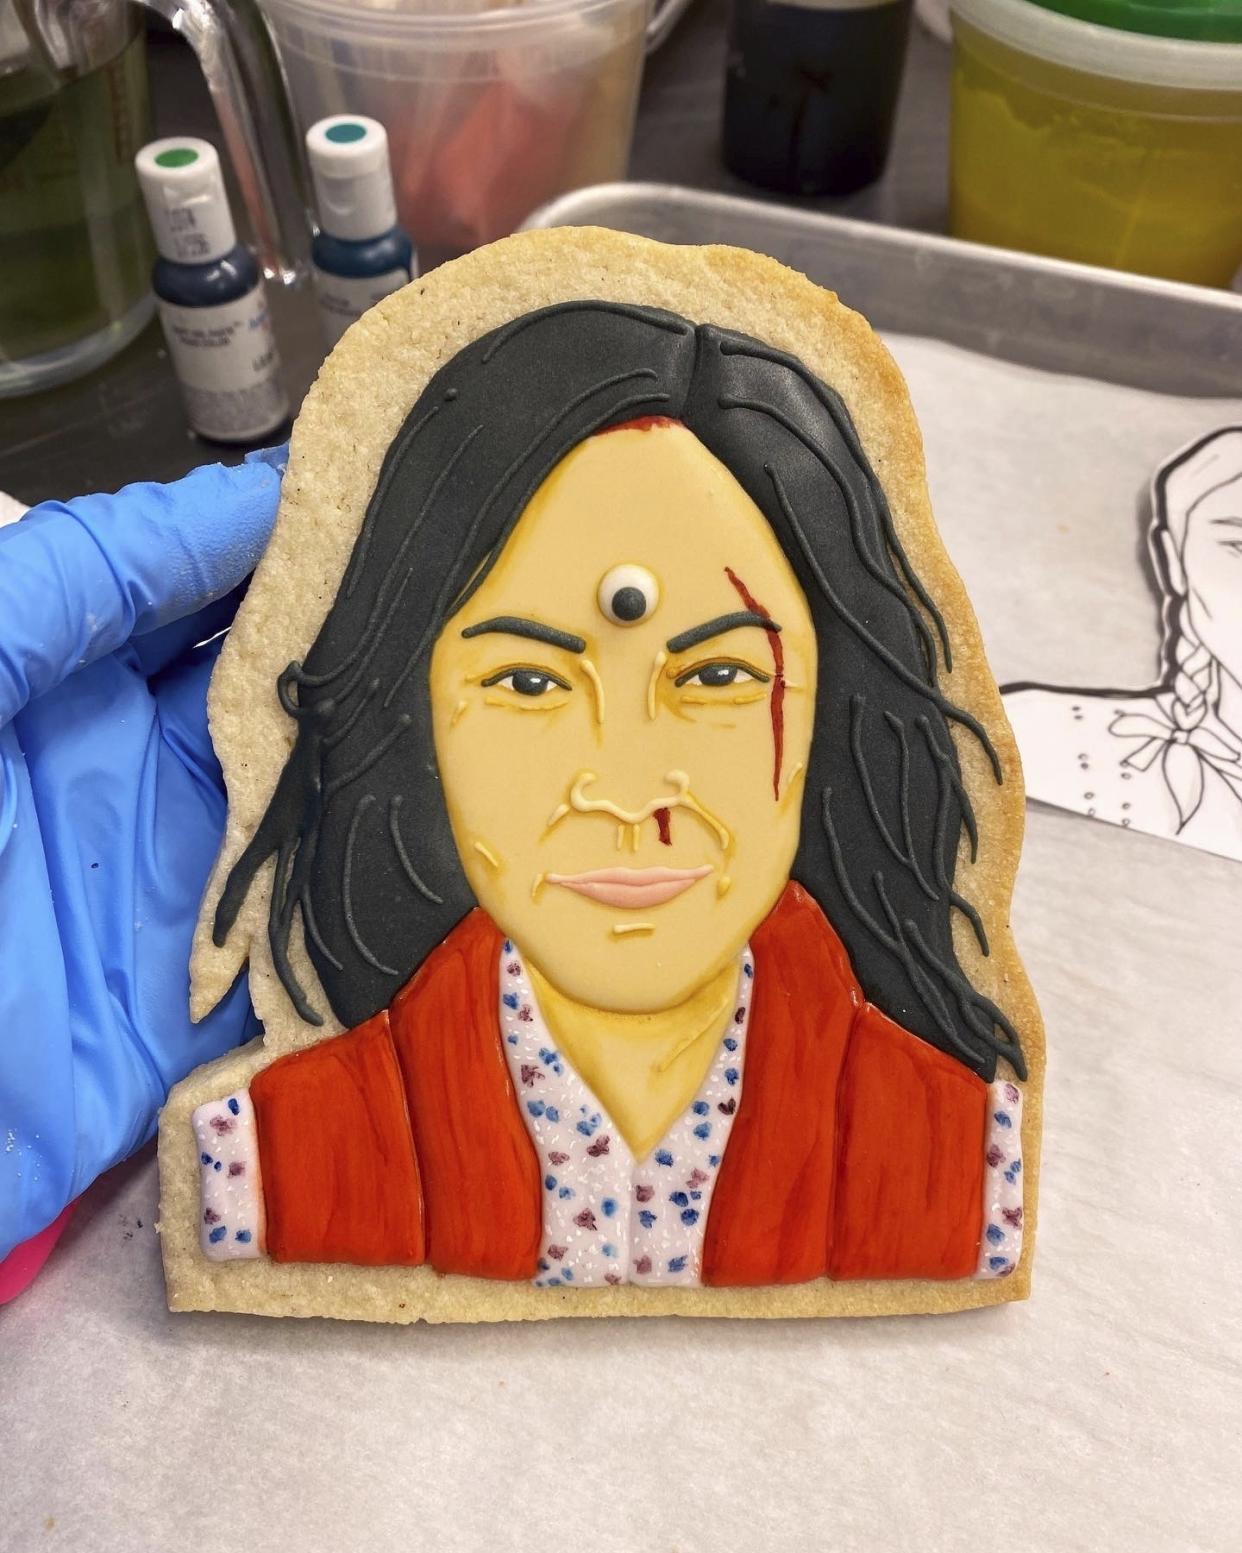 This undated photo provided by Jasmine Cho shows a cookie portrait of Michelle Yeoh's character from "Everything Everywhere All at Once" made by Cho, a "cookie activist" based in Pittsburgh. Ke Huy Quan's best supporting actor win and comeback story from childhood star of '80s flicks, coupled with Yeoh's historic win as the first Asian best actress winner ever had viewers of Asian descent shedding tears of happiness — and grinning. The "Everything Everywhere All at Once" co-stars bring the total number of Asians who have earned acting Oscars to just six in the awards' 95-year history. ( Jasmine Cho via AP)